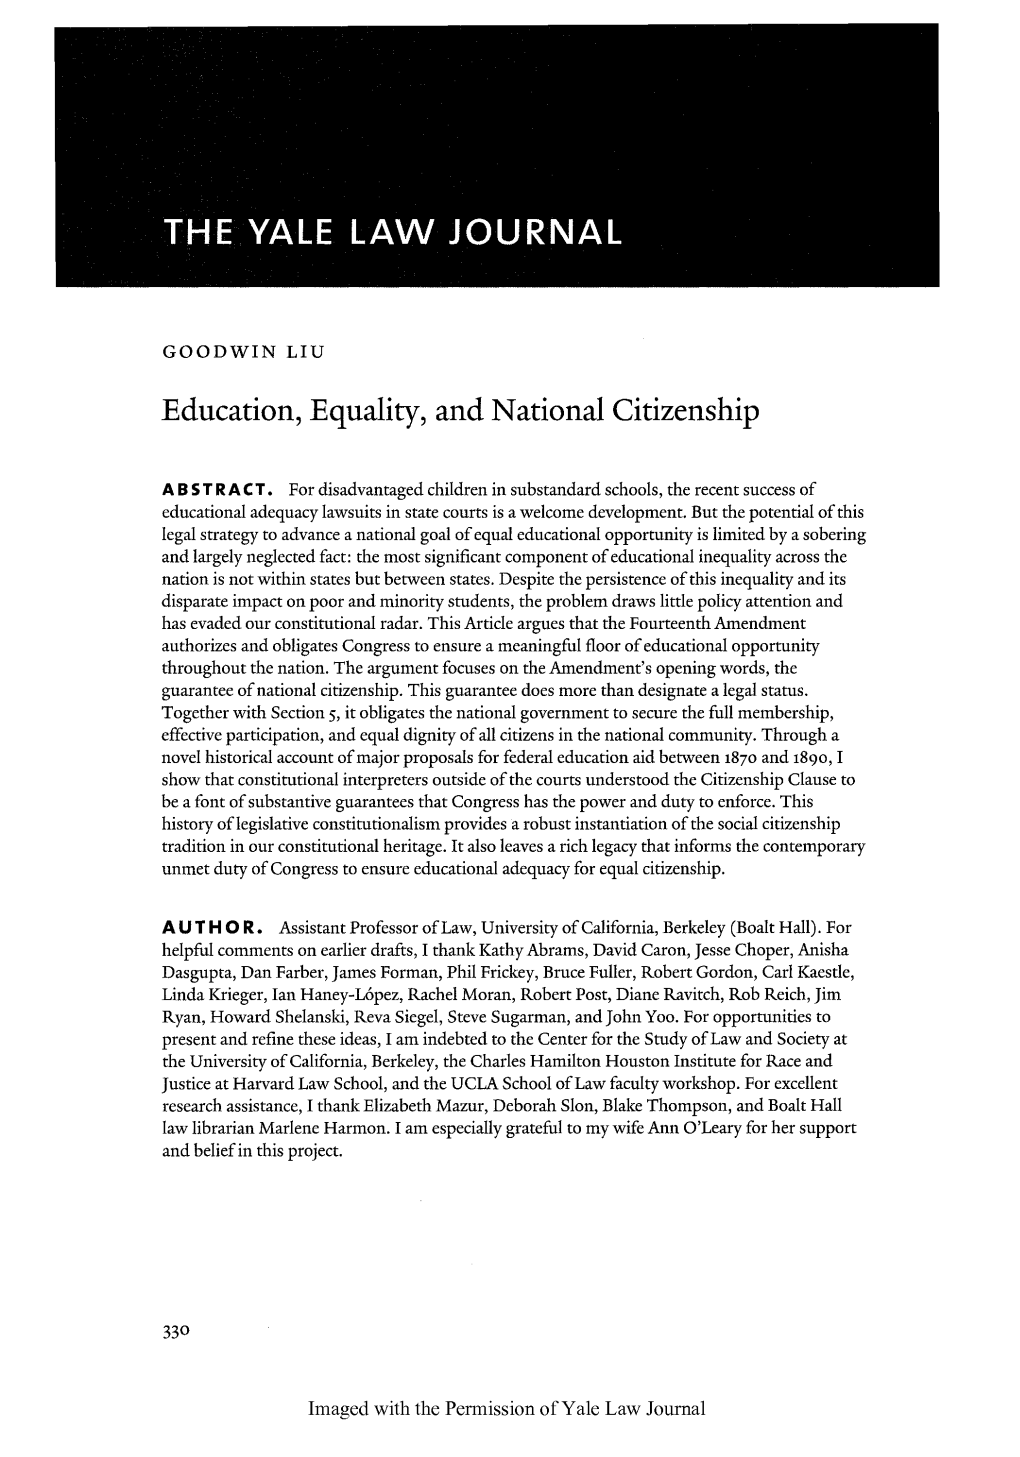 Education, Equality, and National Citizenship